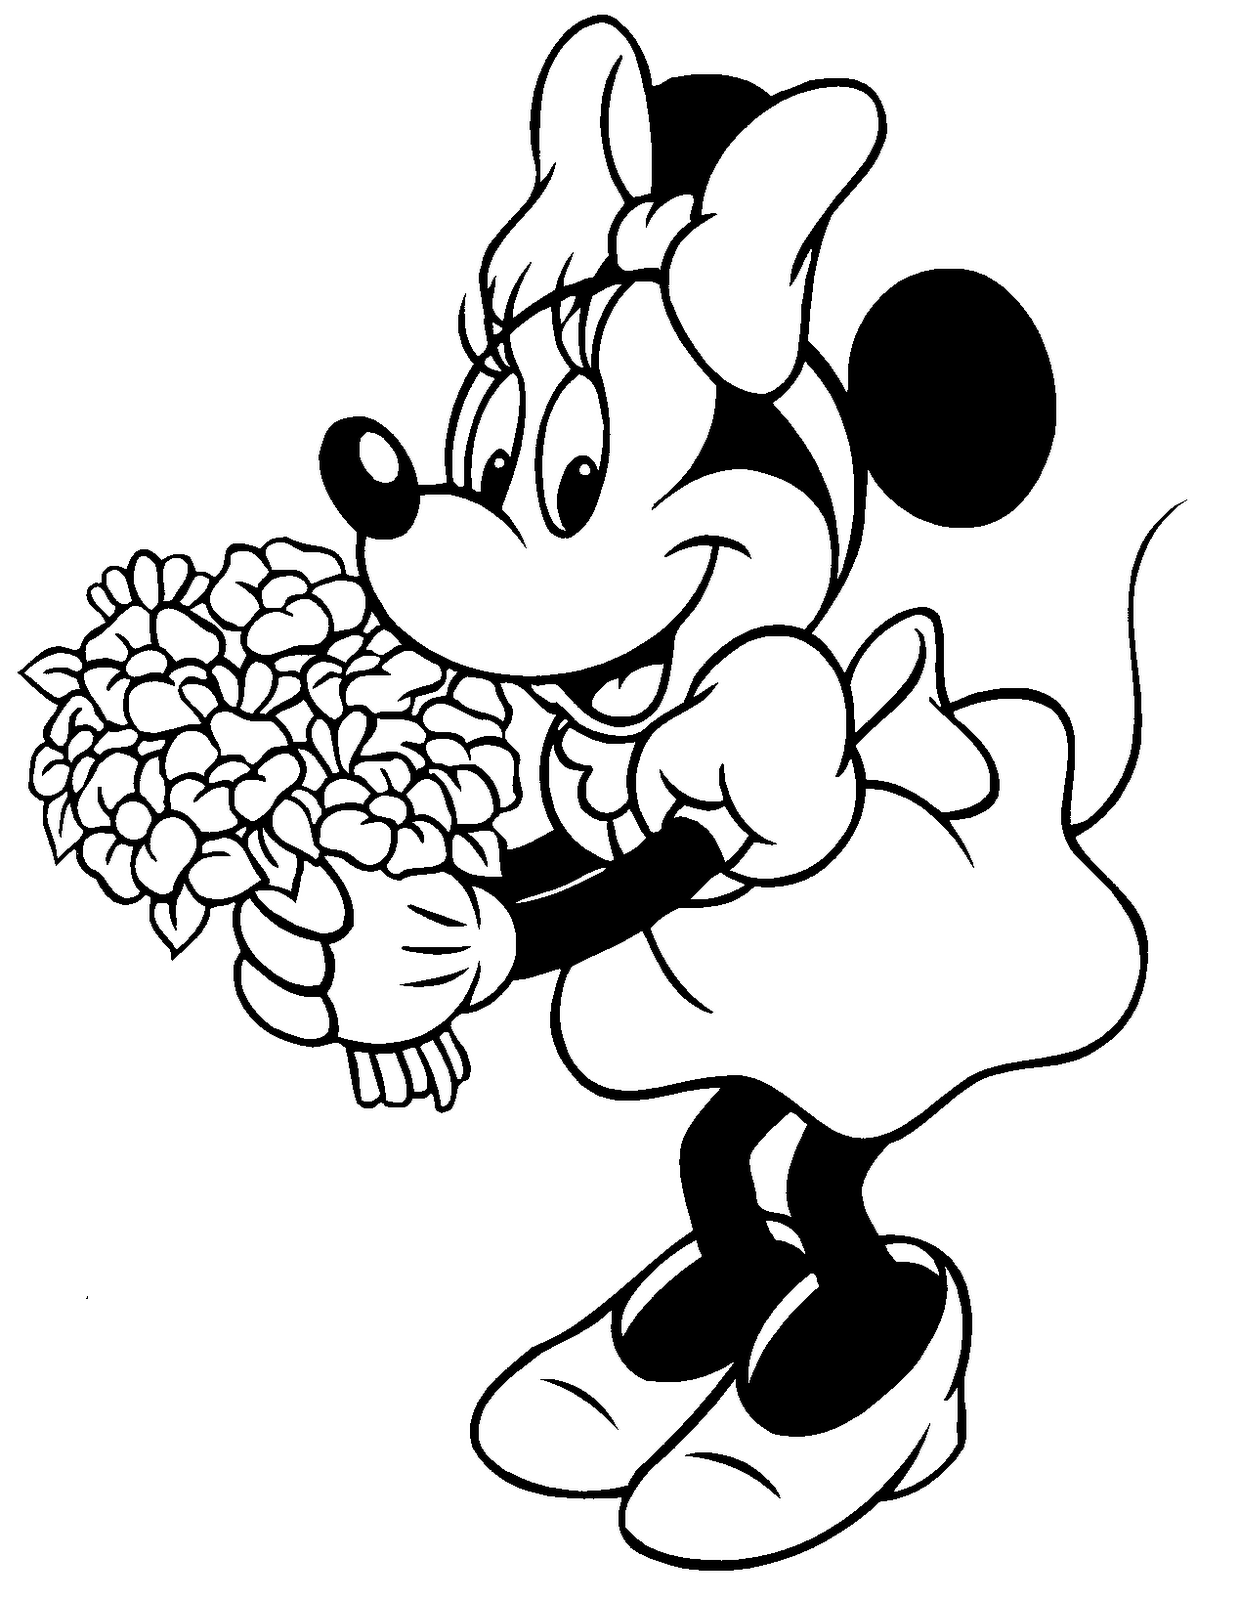 Minnie mouse coloring picture,minnie mouse coloring pages - Prints ...